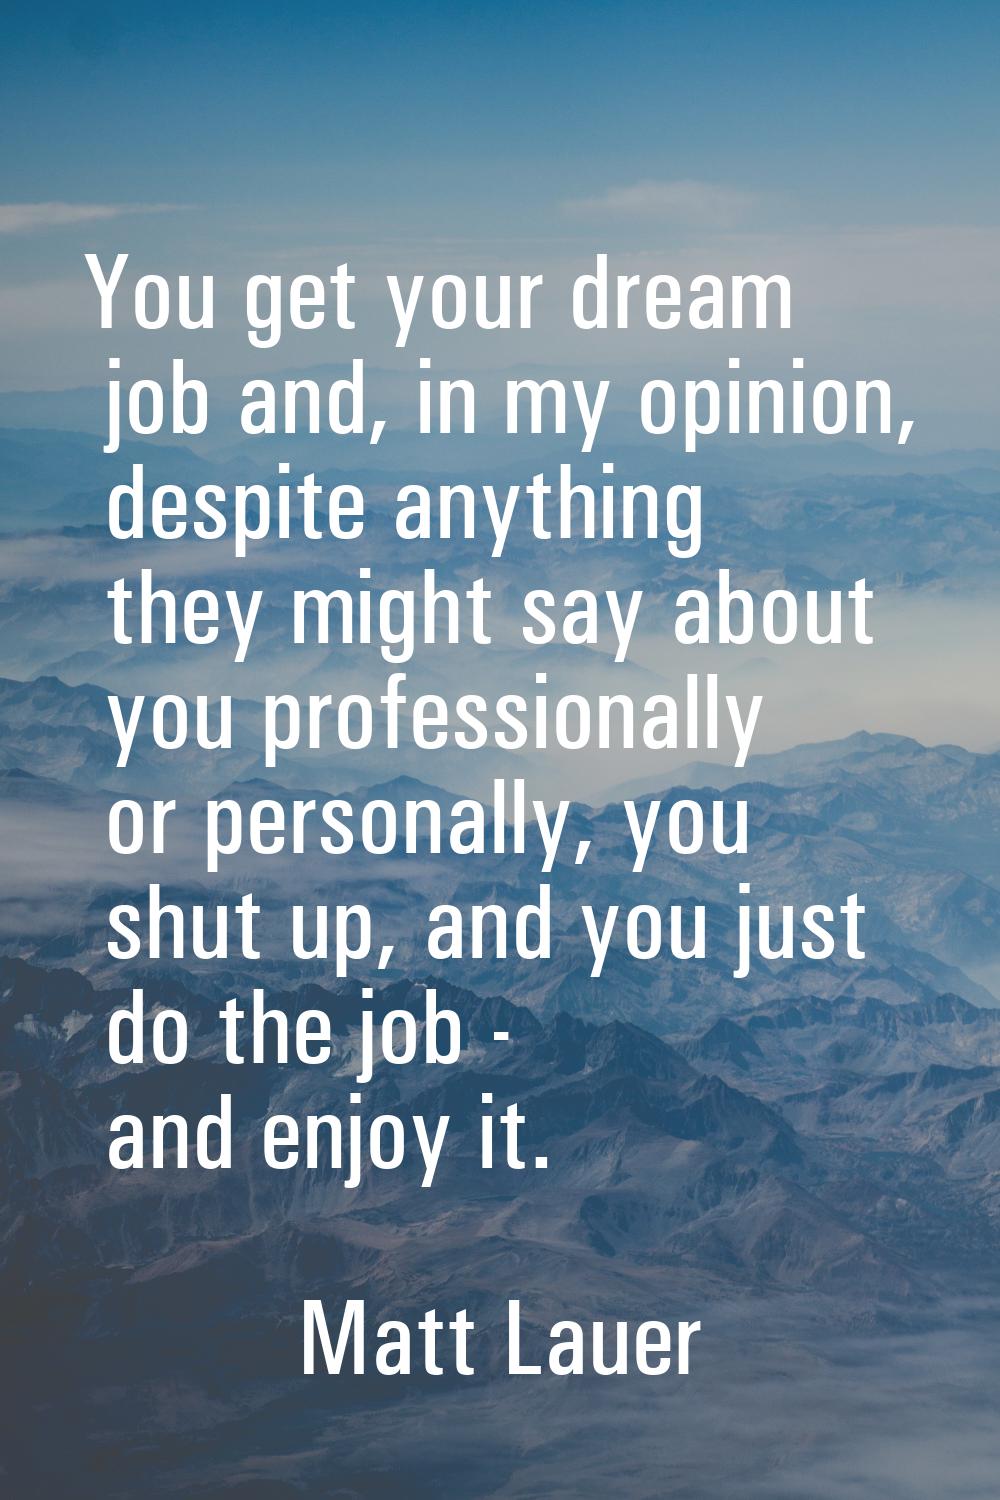 You get your dream job and, in my opinion, despite anything they might say about you professionally